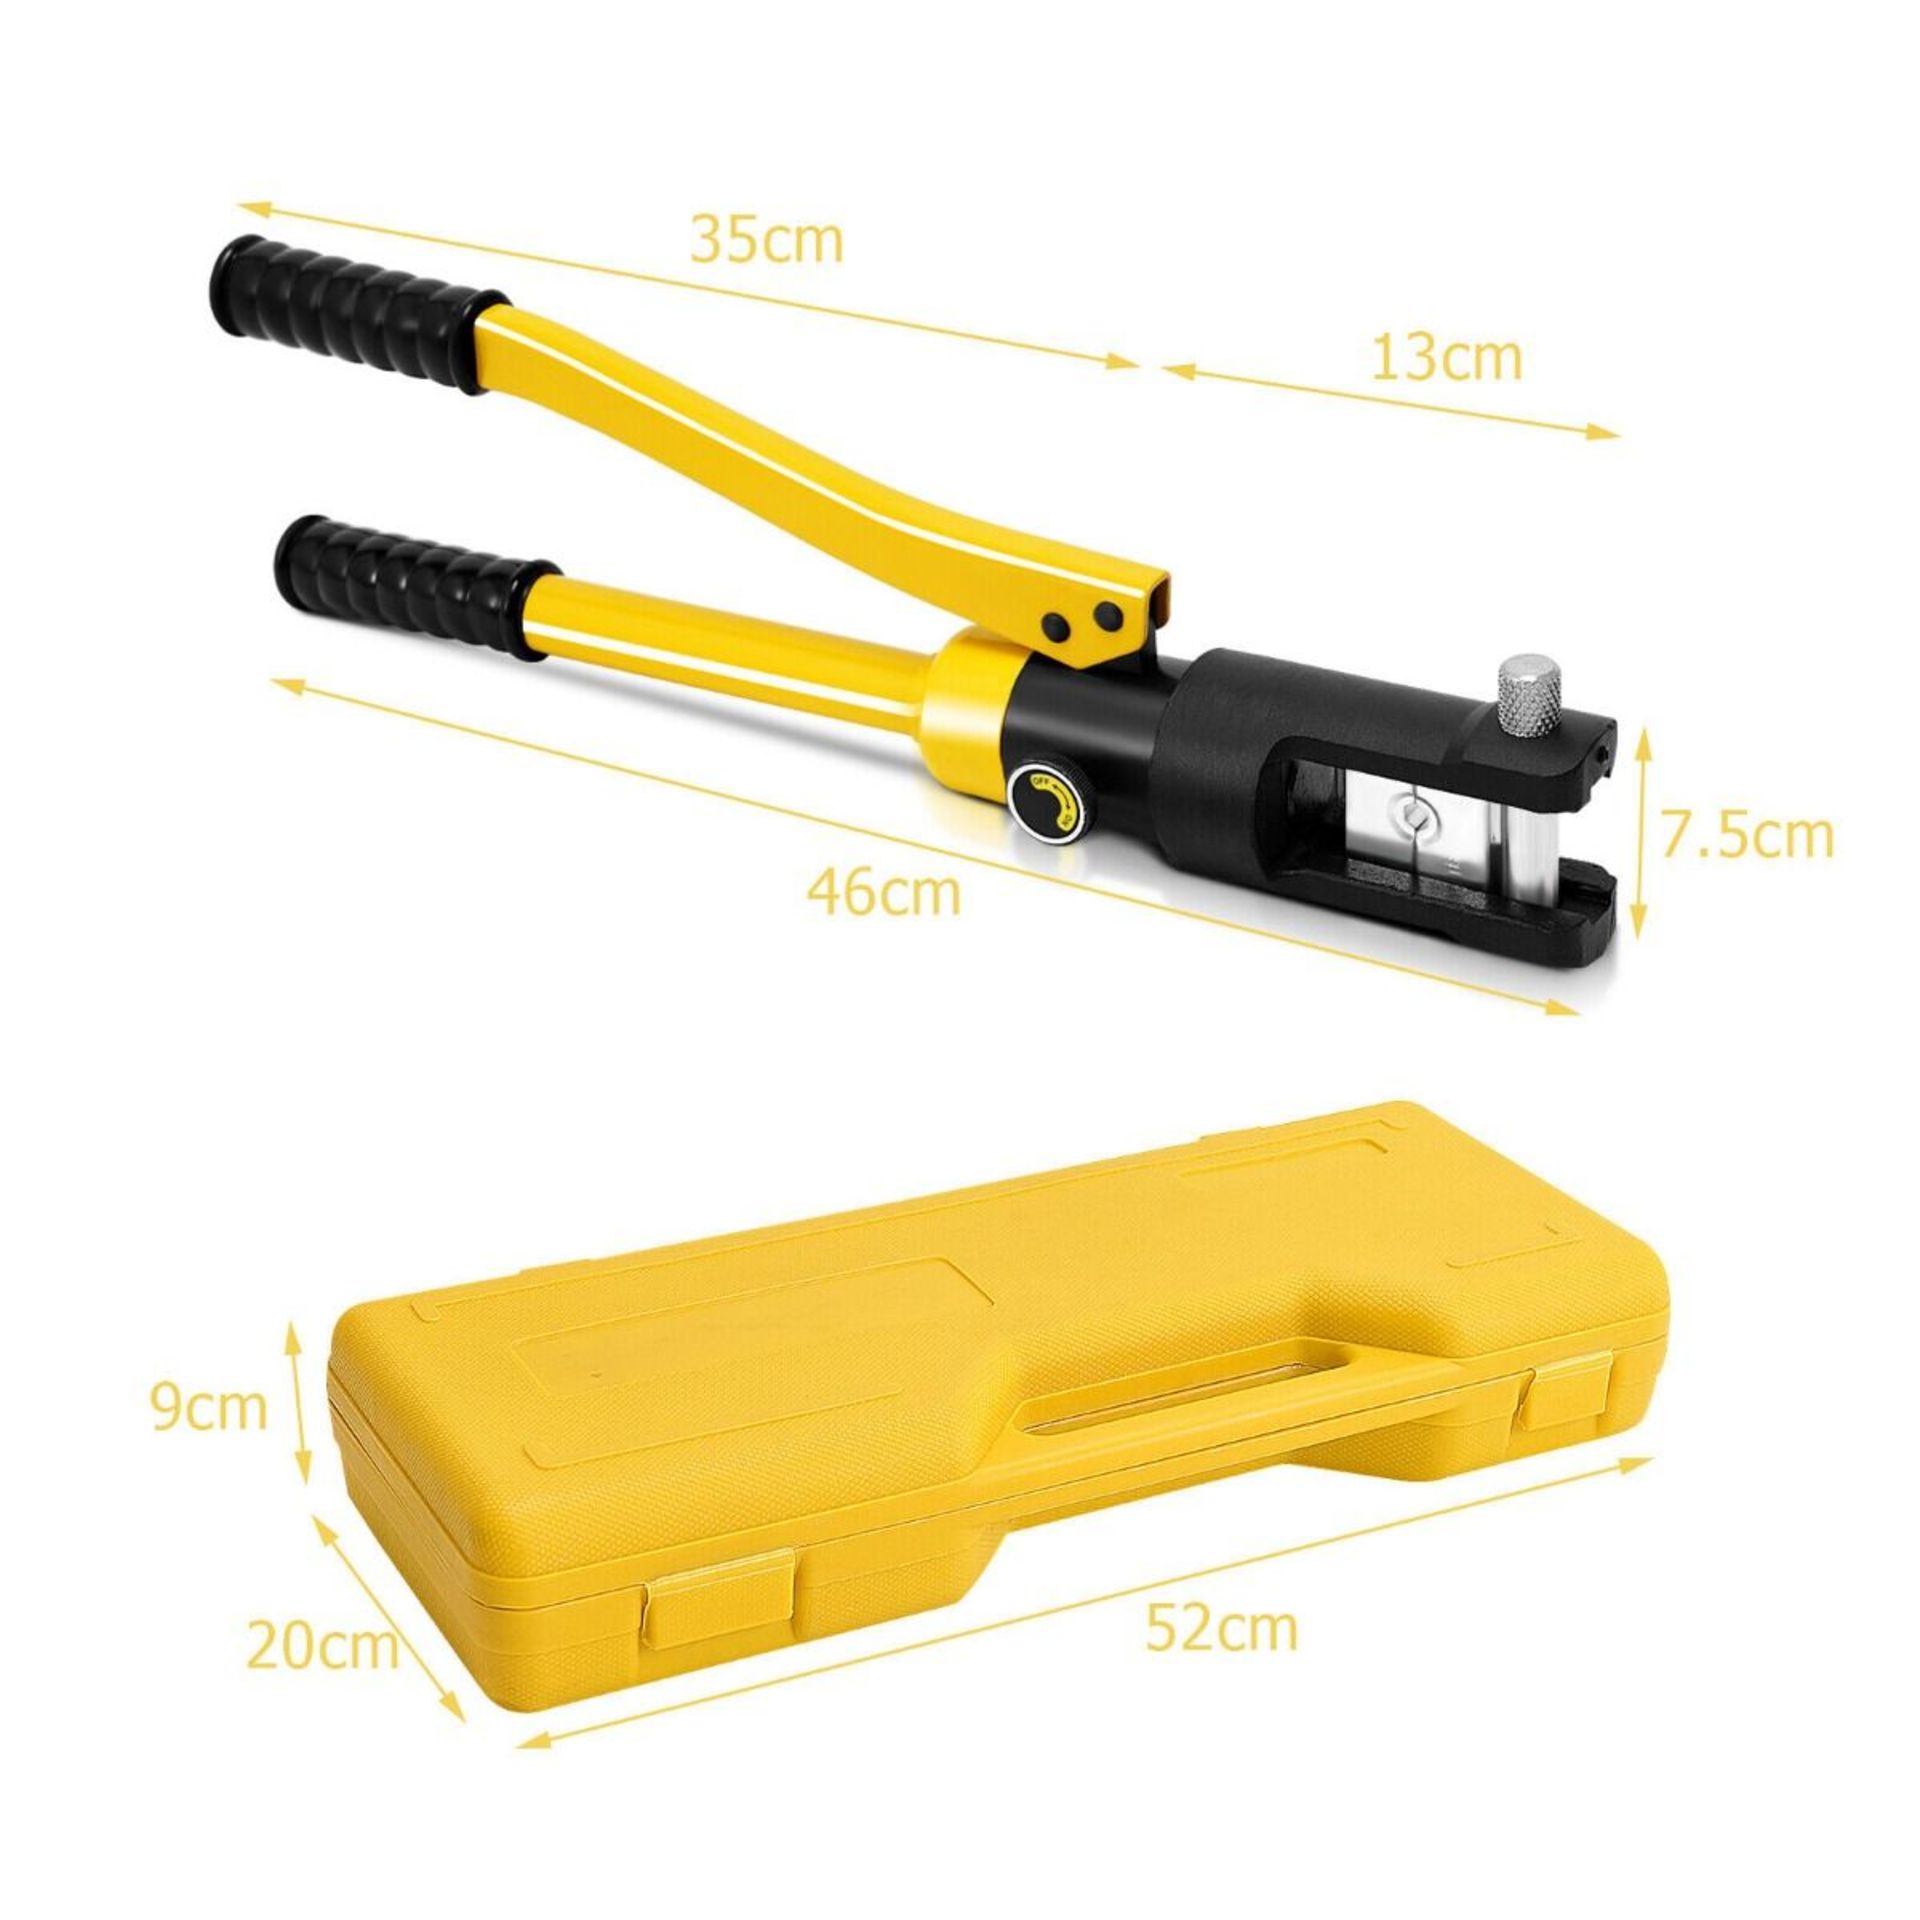 16 Tons 11 Dies Hydraulic Wire Terminal Crimper Tool with Carry Case. This is a 16-ton hydraulic